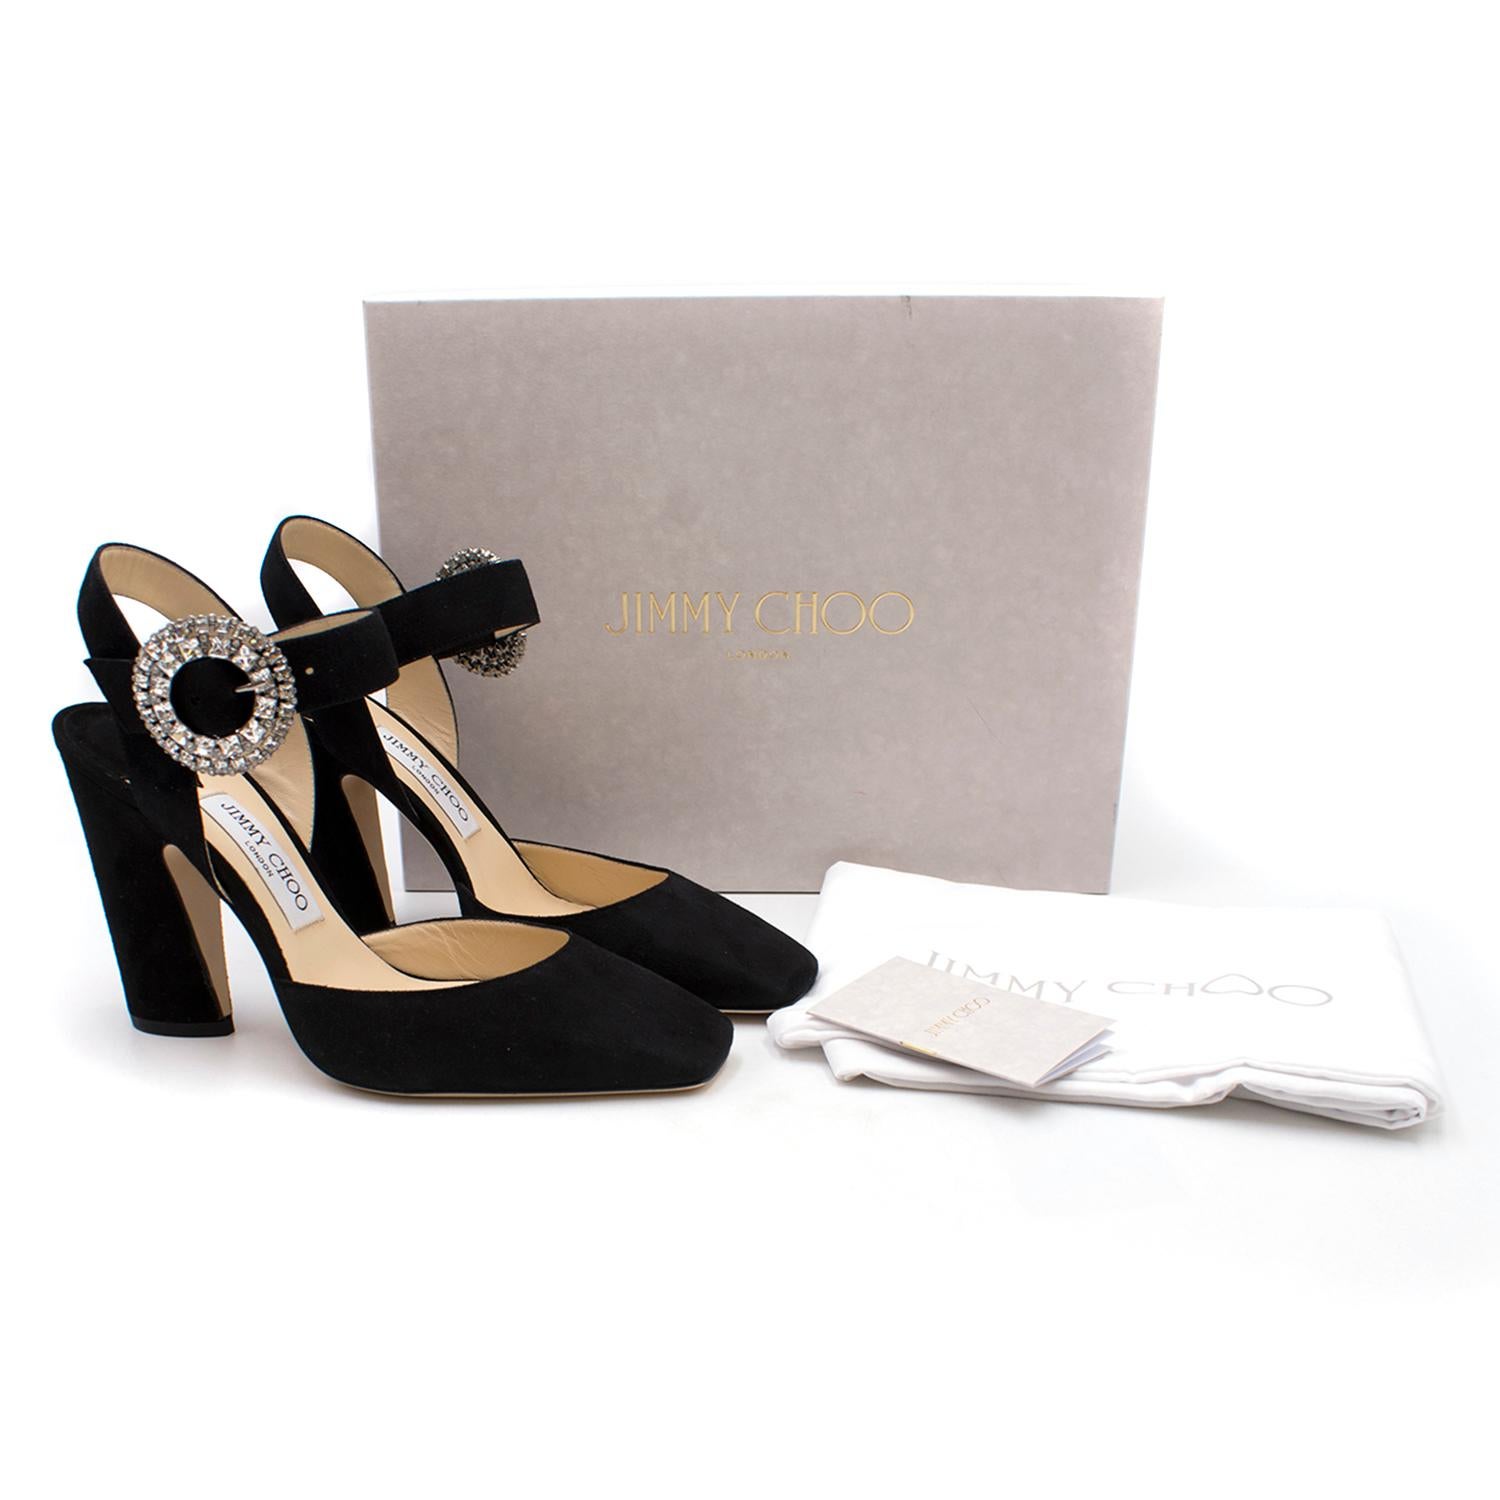 Jimmy Choo Matilda 100 Black Suede Crystal Buckle Pumps

- Current season
- Closed, square toe
- Soft black suede
- Slingback style
- Crystal buckle
- Leather lined
- Leather sole
- Brand new, never worn with all packaging, dust bag and box